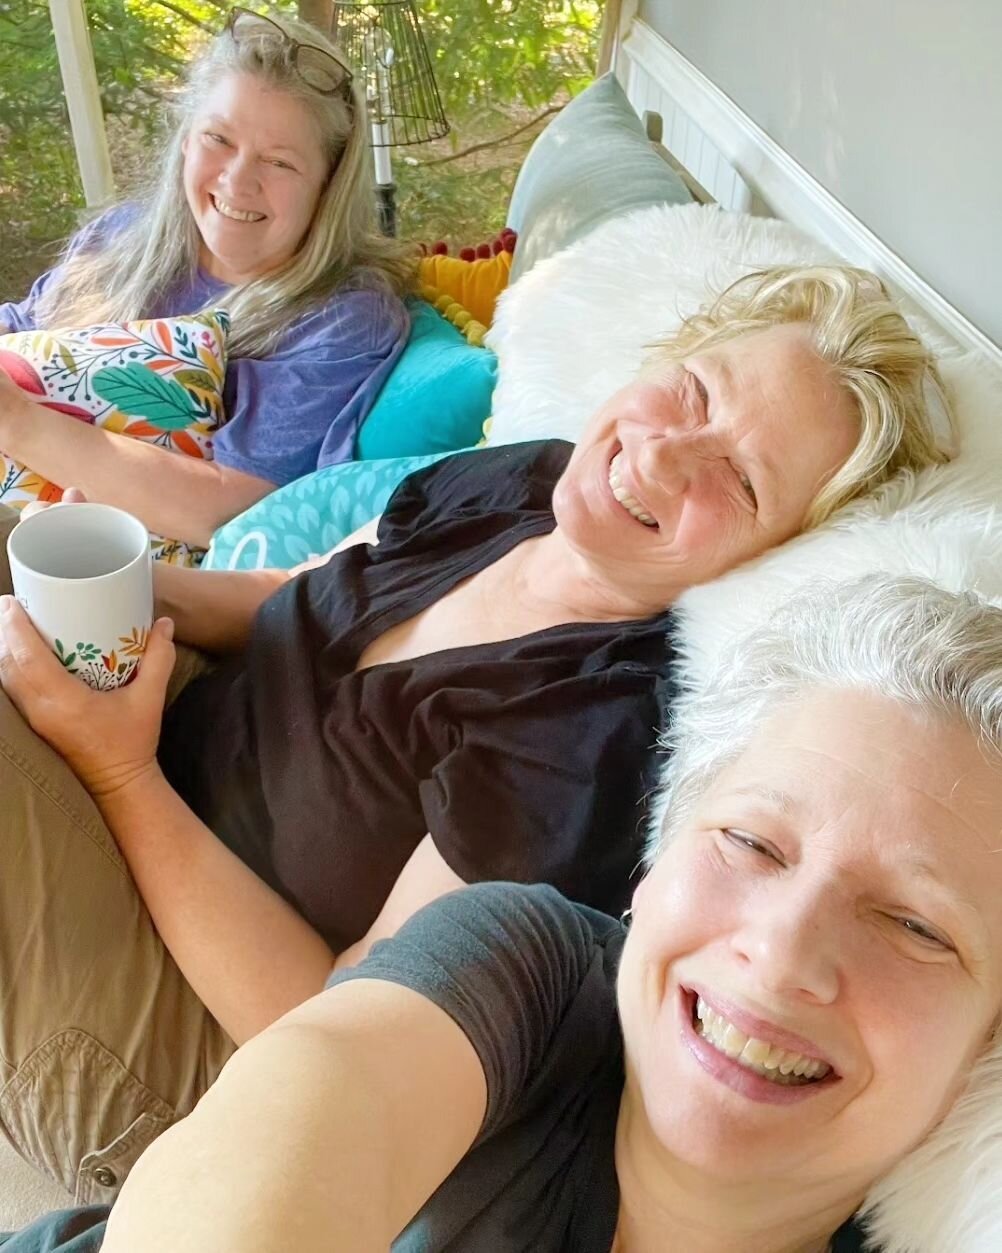 What's better than getting together with your best friends? Getting together with your best friends for a getaway at Your Alpaca Cottage! 🥰💛🦙 Now booking April &amp; May weekends at the Link in our Bio ✔️

📸 A trio of truly lovely Your Alpaca Cot